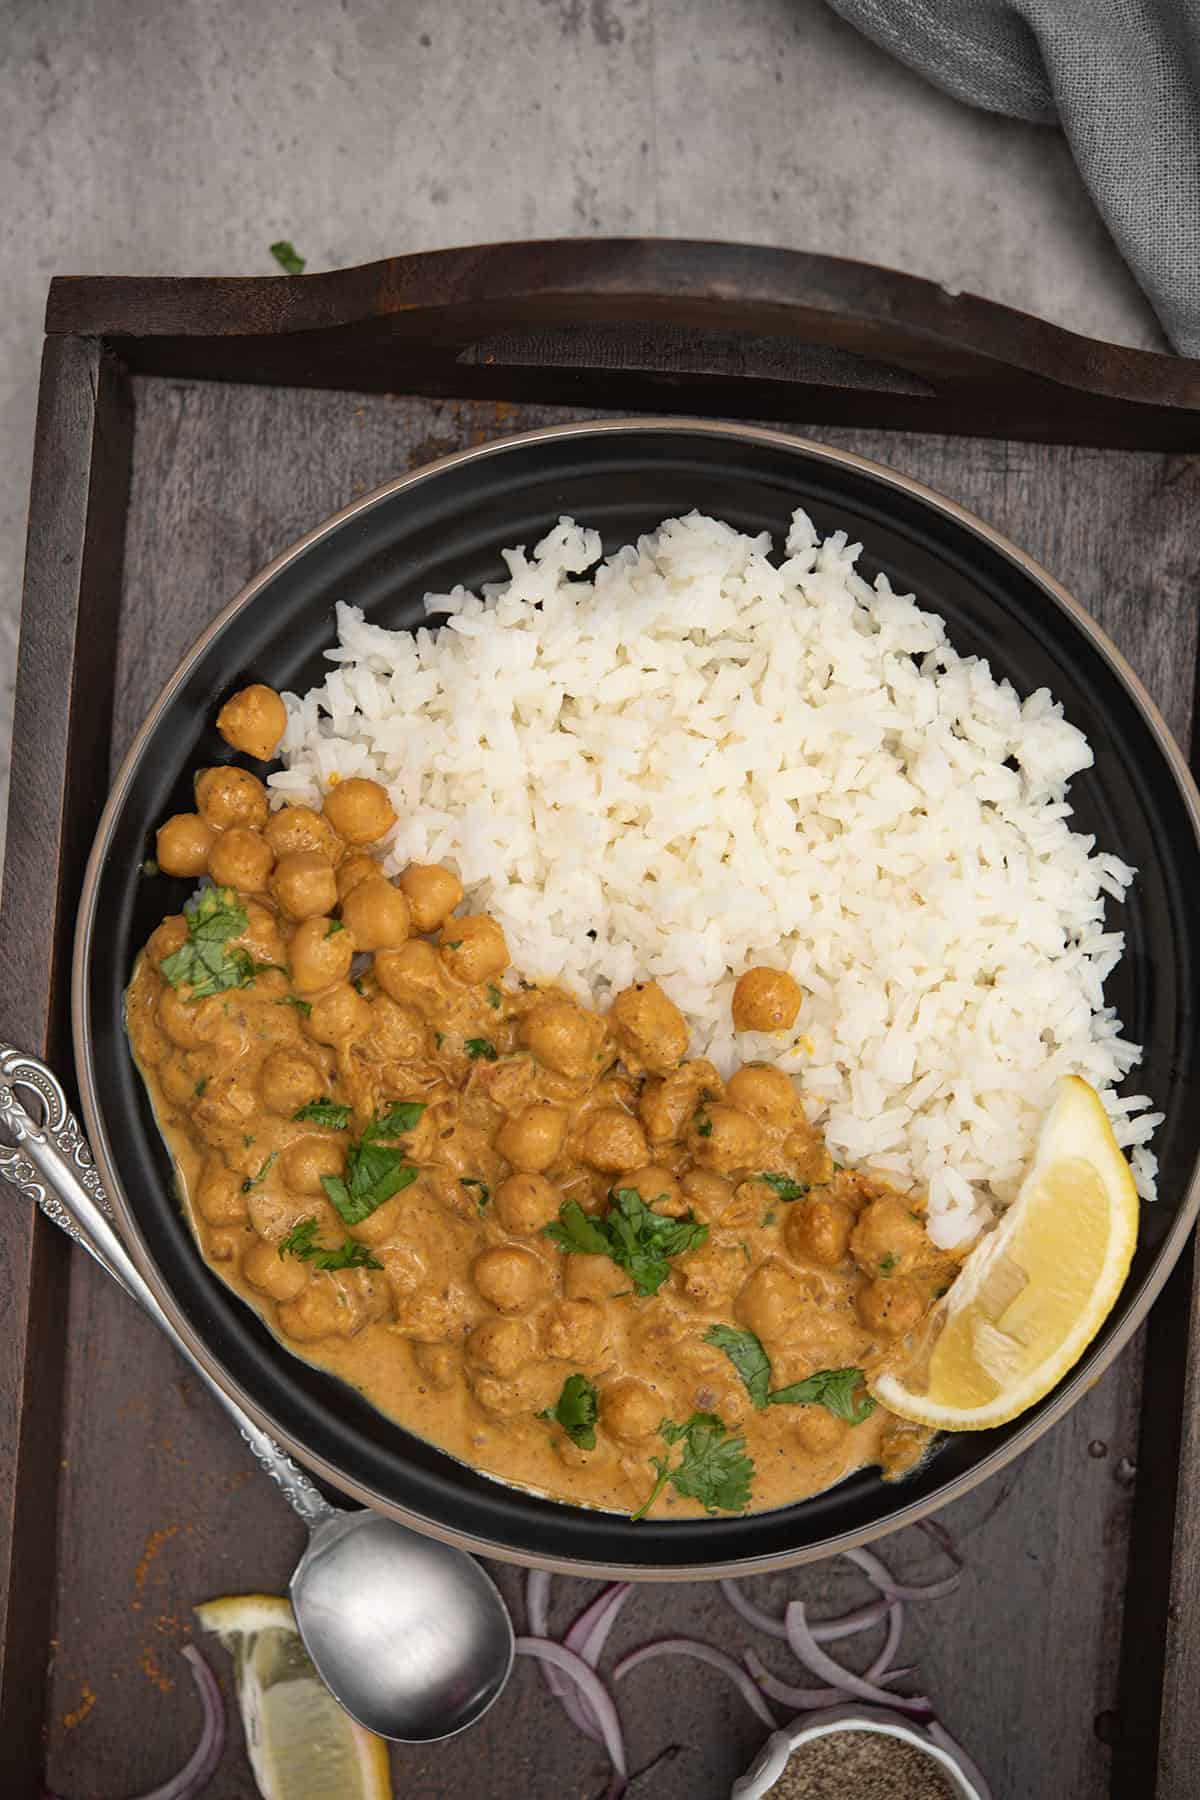 almond milk curry served with rice for dinner